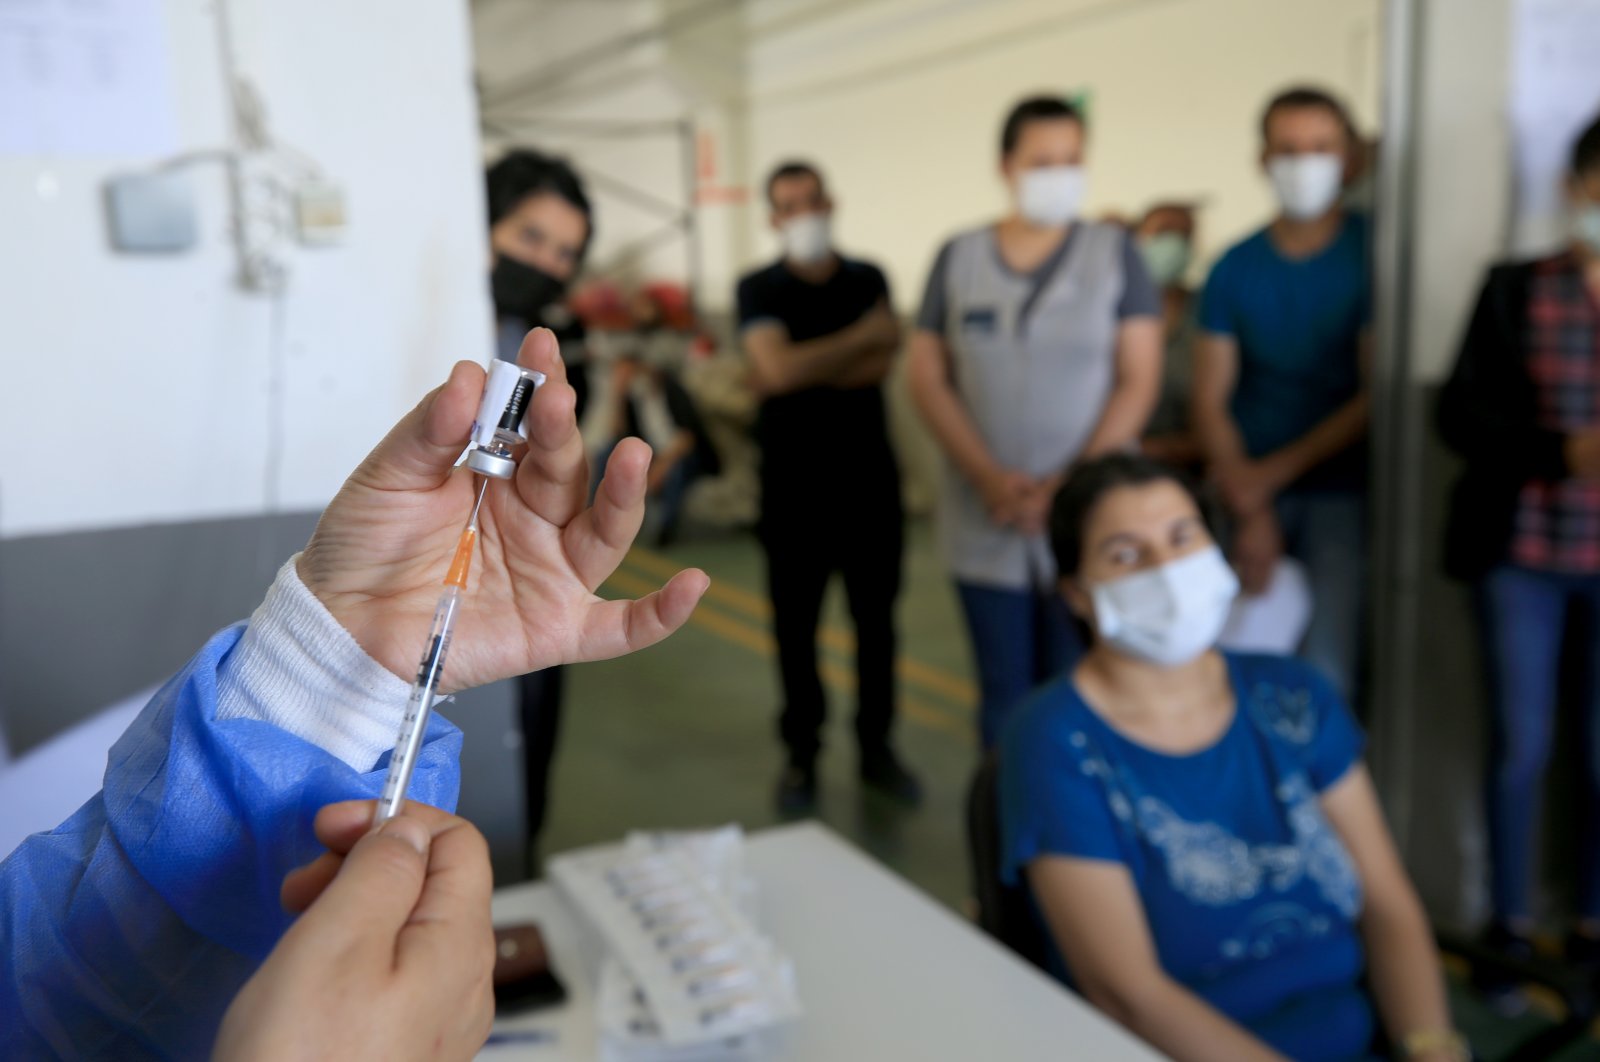 A health care worker prepares a COVID-19 shot as workers at a factory wait for their jabs, in Kırklareli, northwestern Turkey, June 16, 2021. (AA PHOTO)